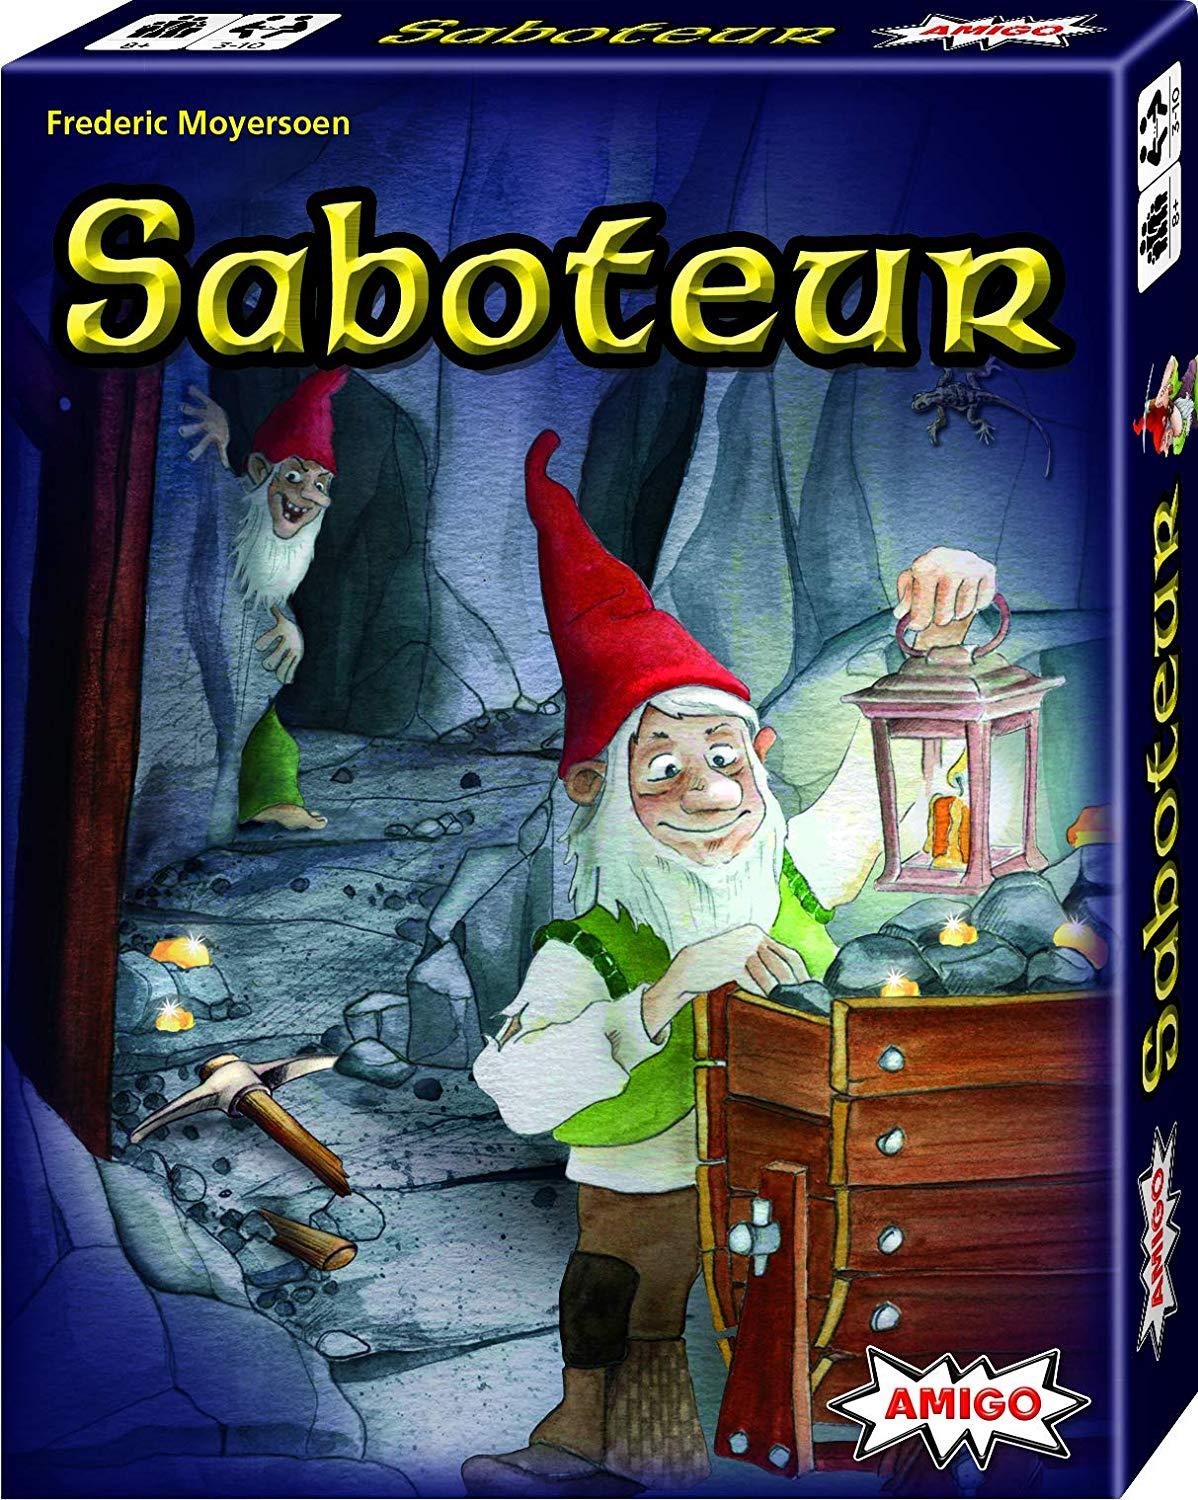 Saboteur Board Games Mayfair Games    | Red Claw Gaming